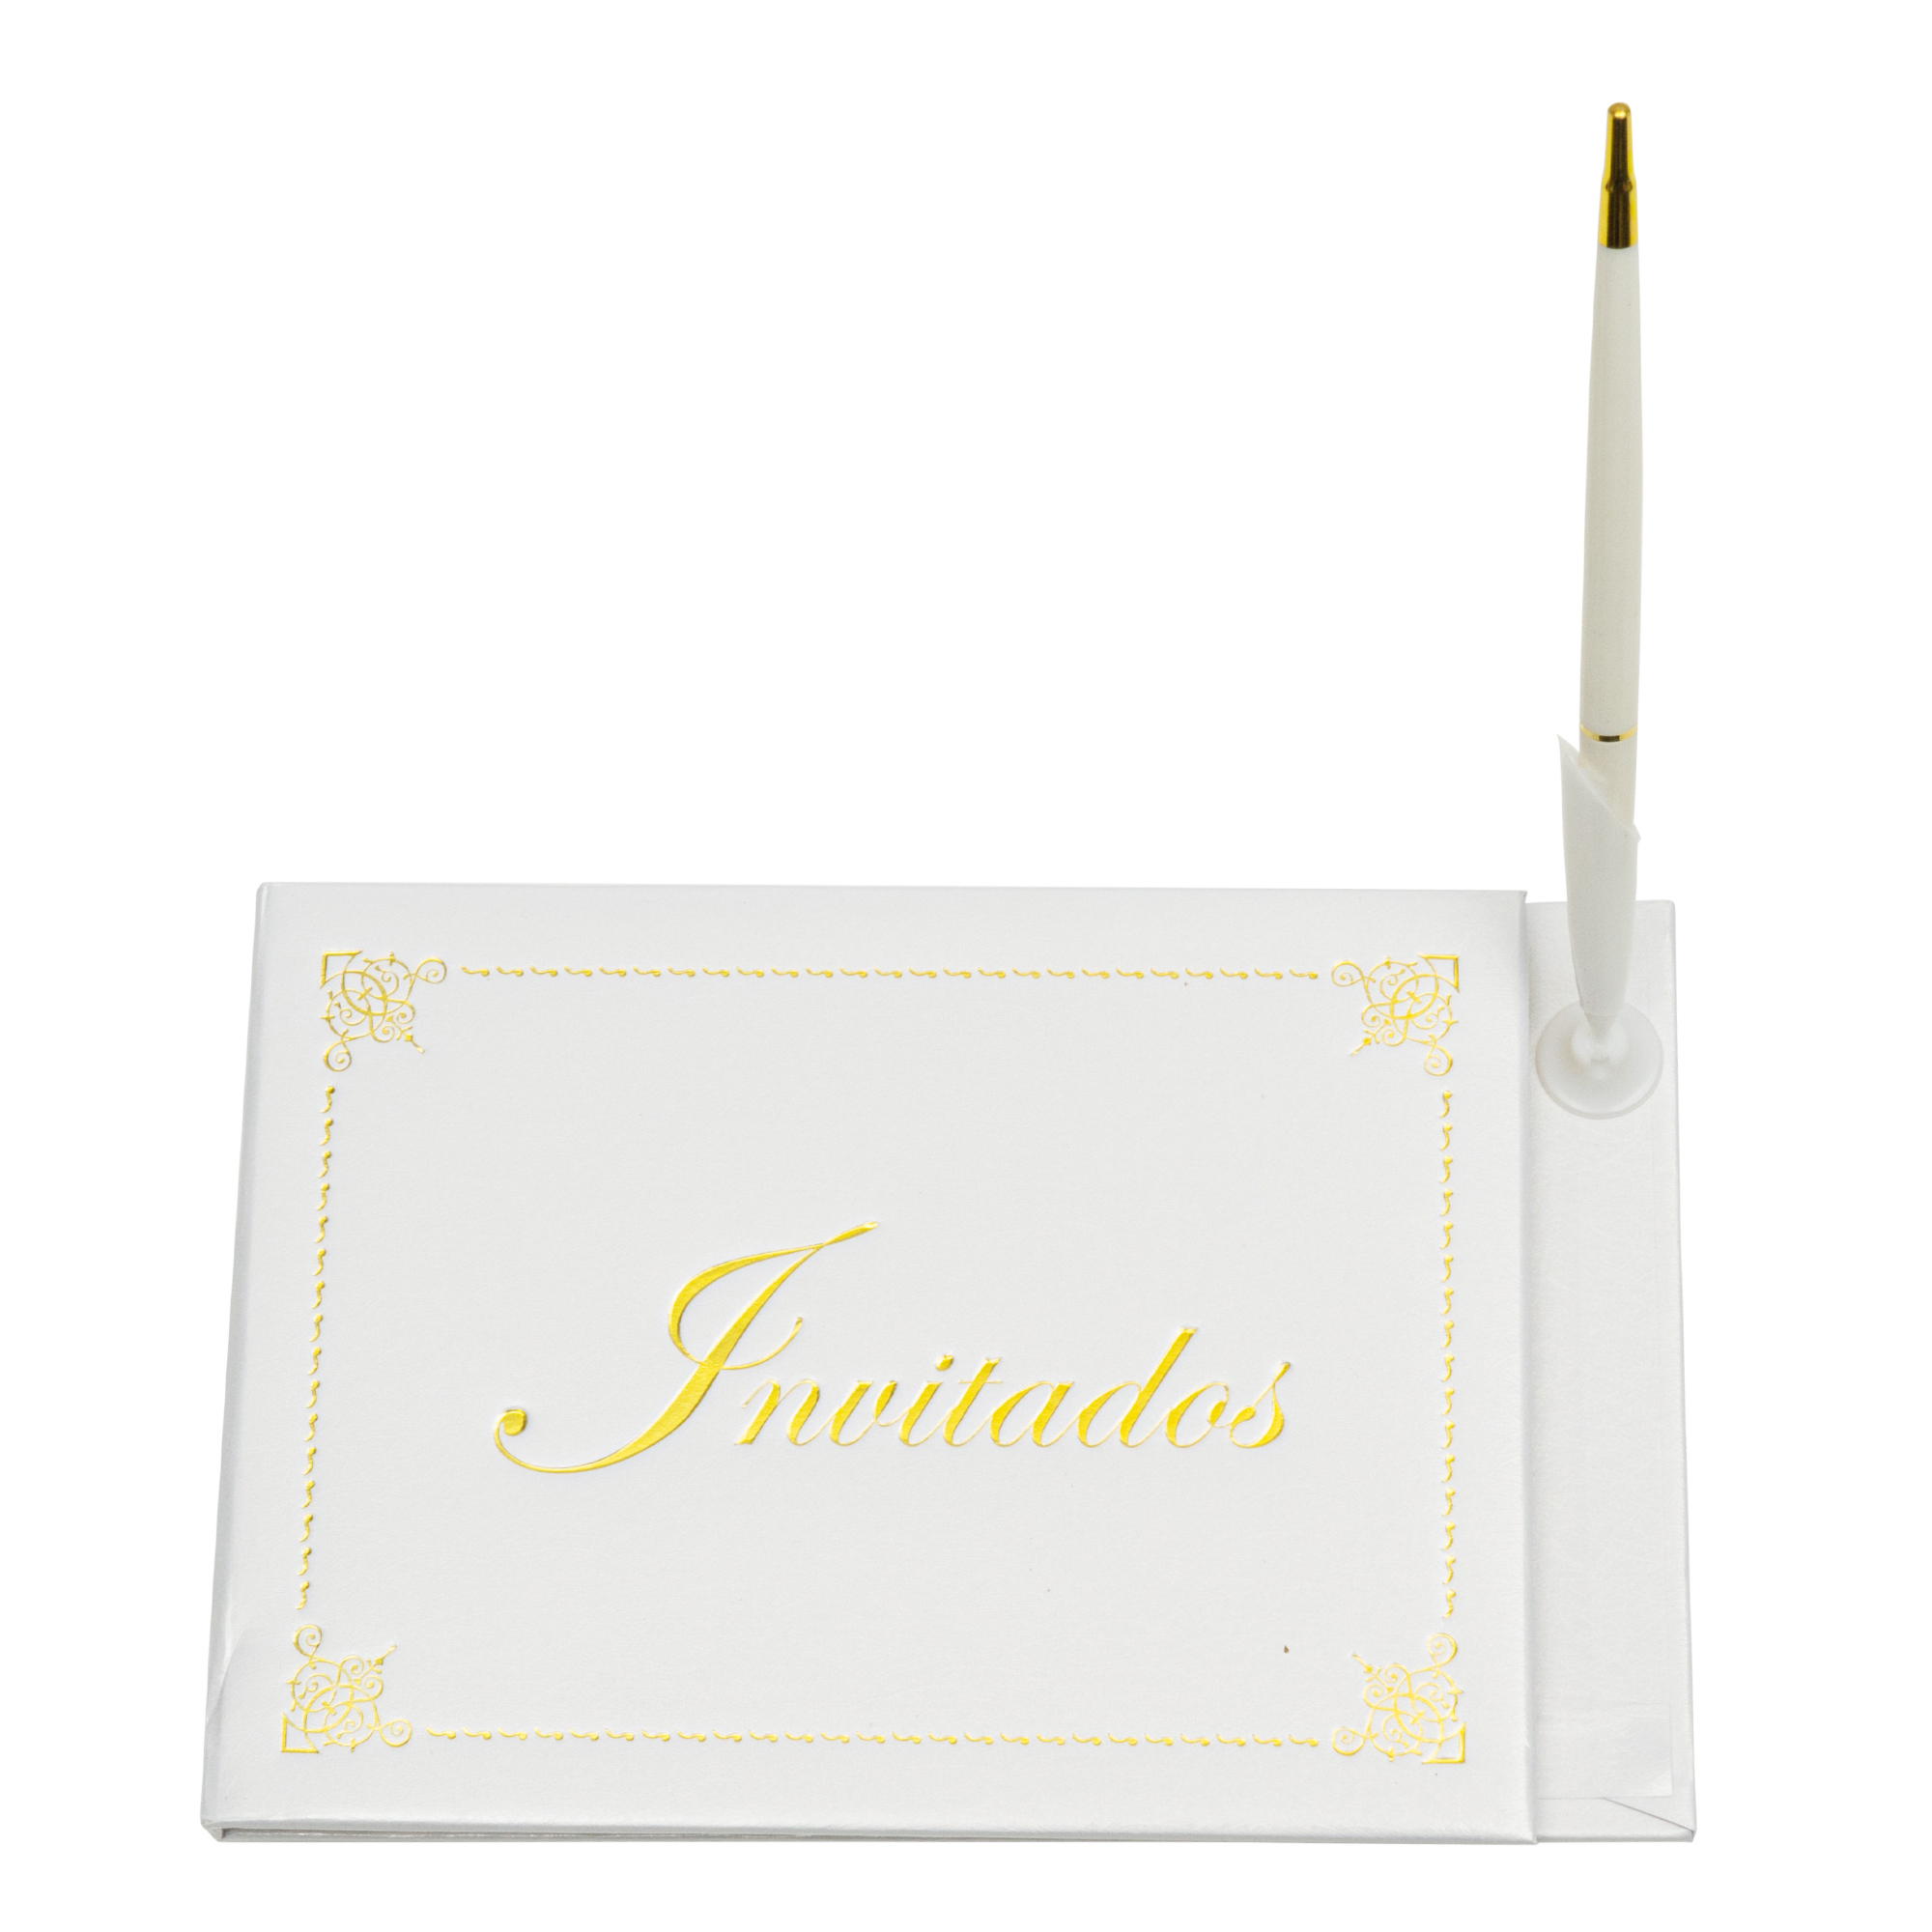 "Invitados" Guest Book with Pen in Spanish